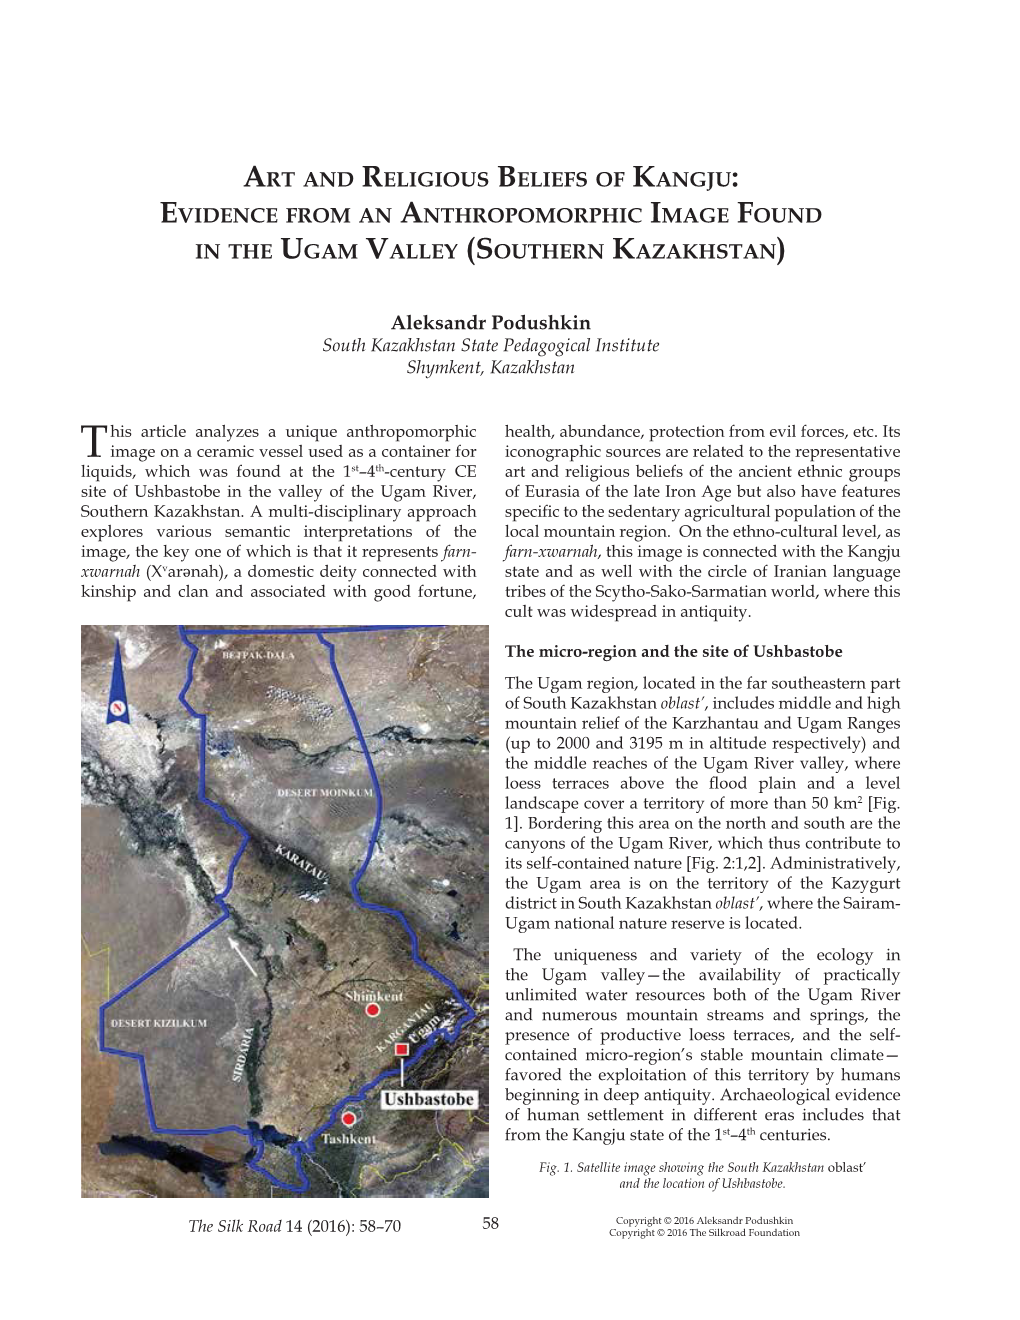 Art and Religious Beliefs of Kangju: Evidence from an Anthropomorphic Image Found in the Ugam Valley (Southern Kazakhstan)